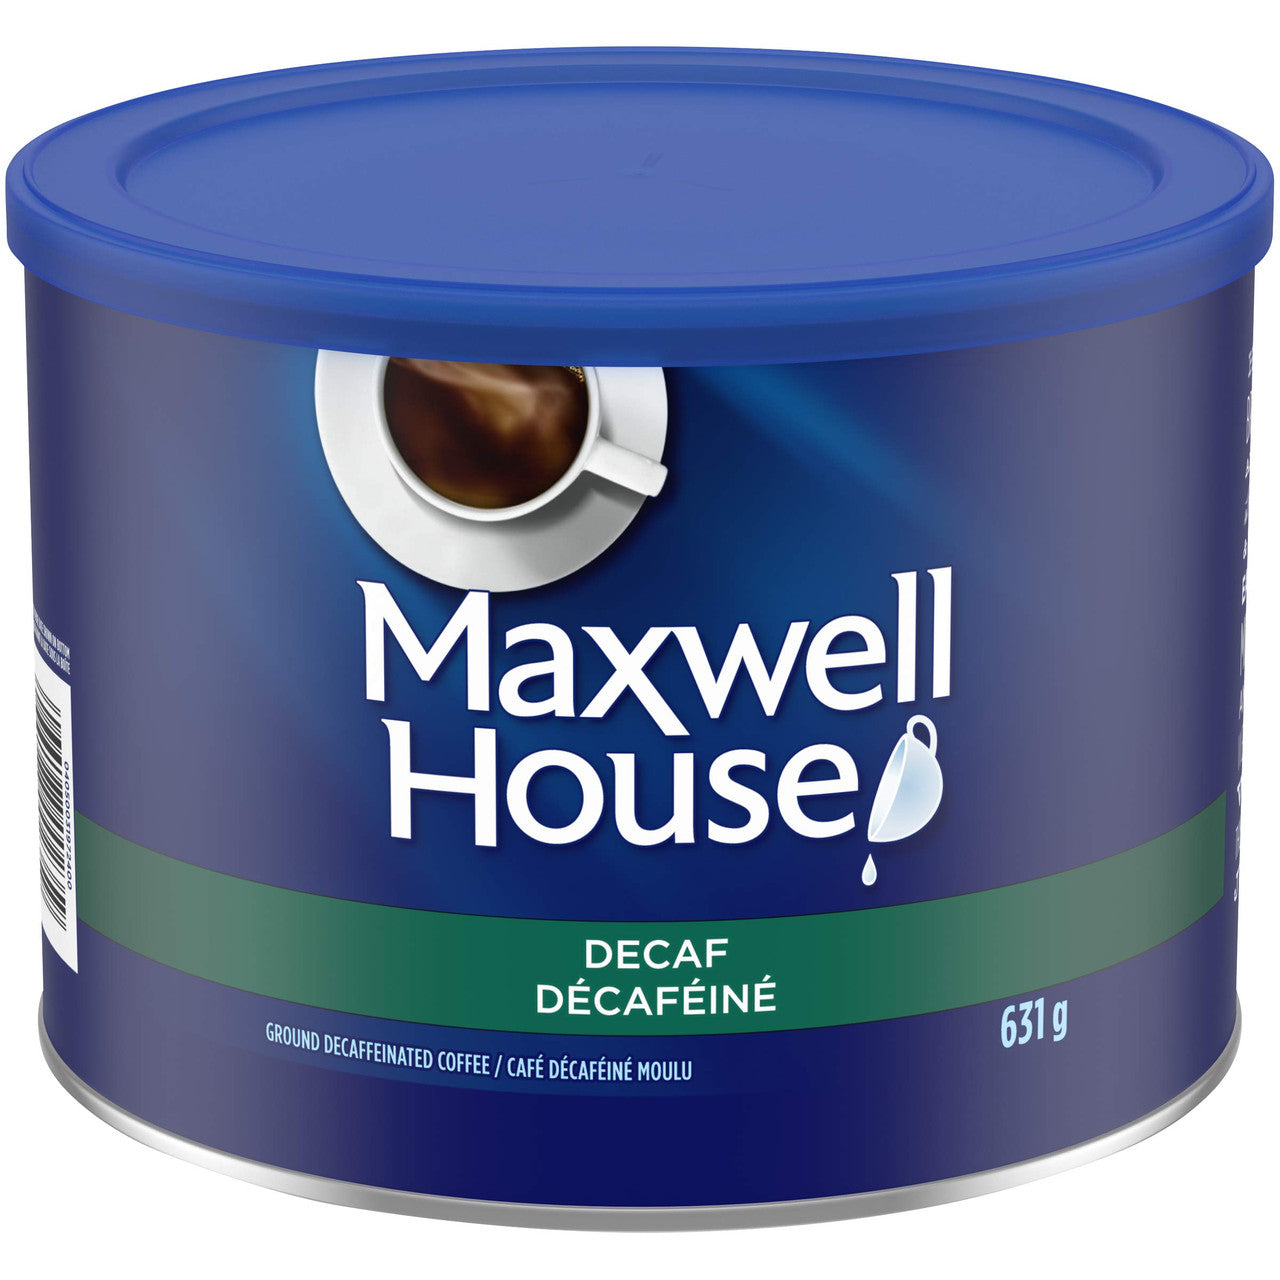 Maxwell House Decaffeinated Ground Coffee, 631g/22.3 oz., {Imported from Canada}